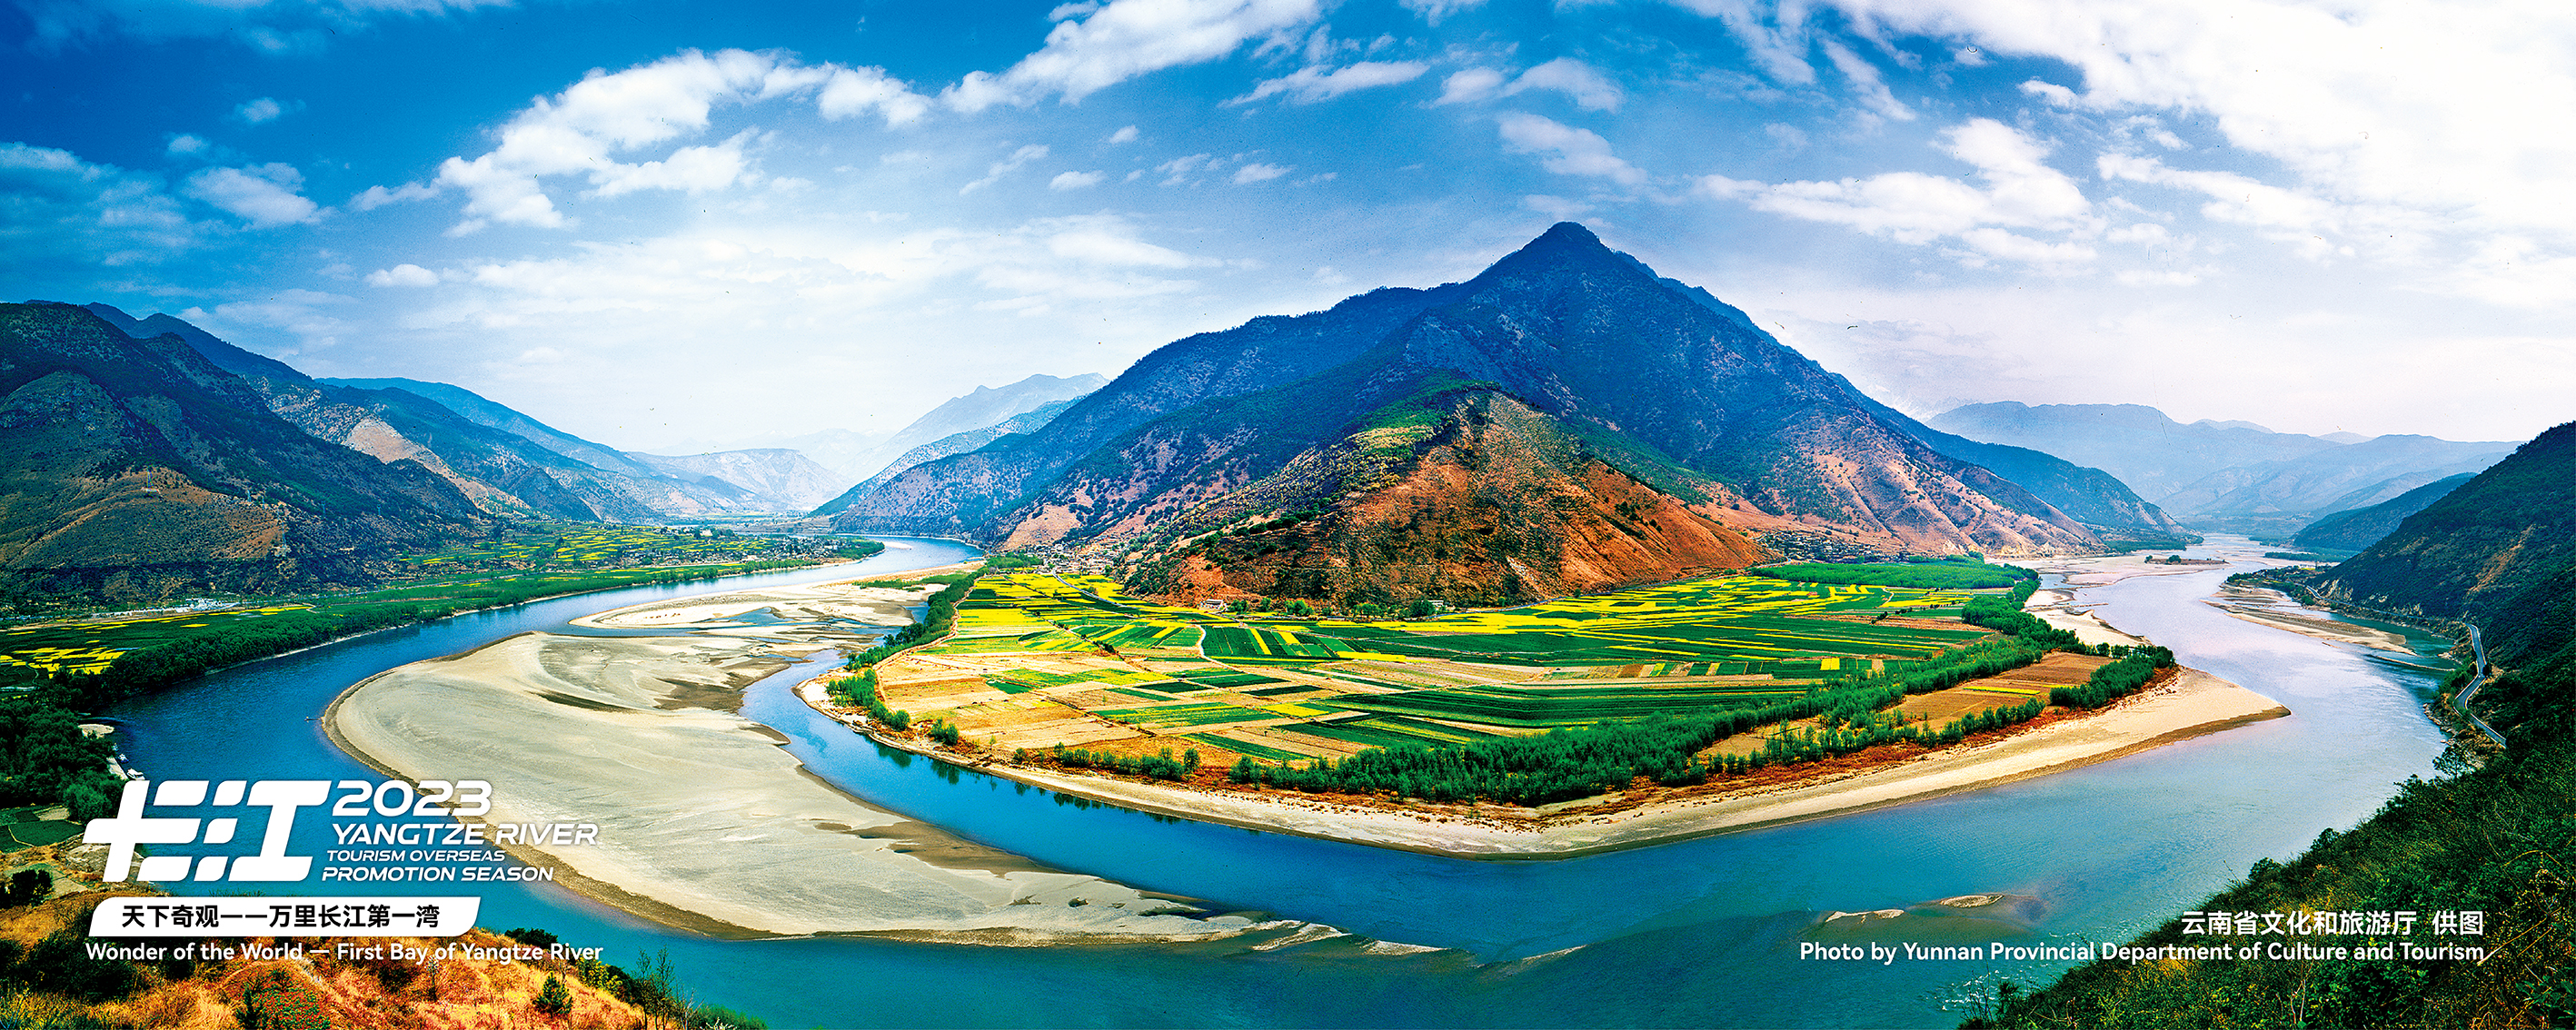 The first bay of the Yangtze River /Photo provided to CGTN